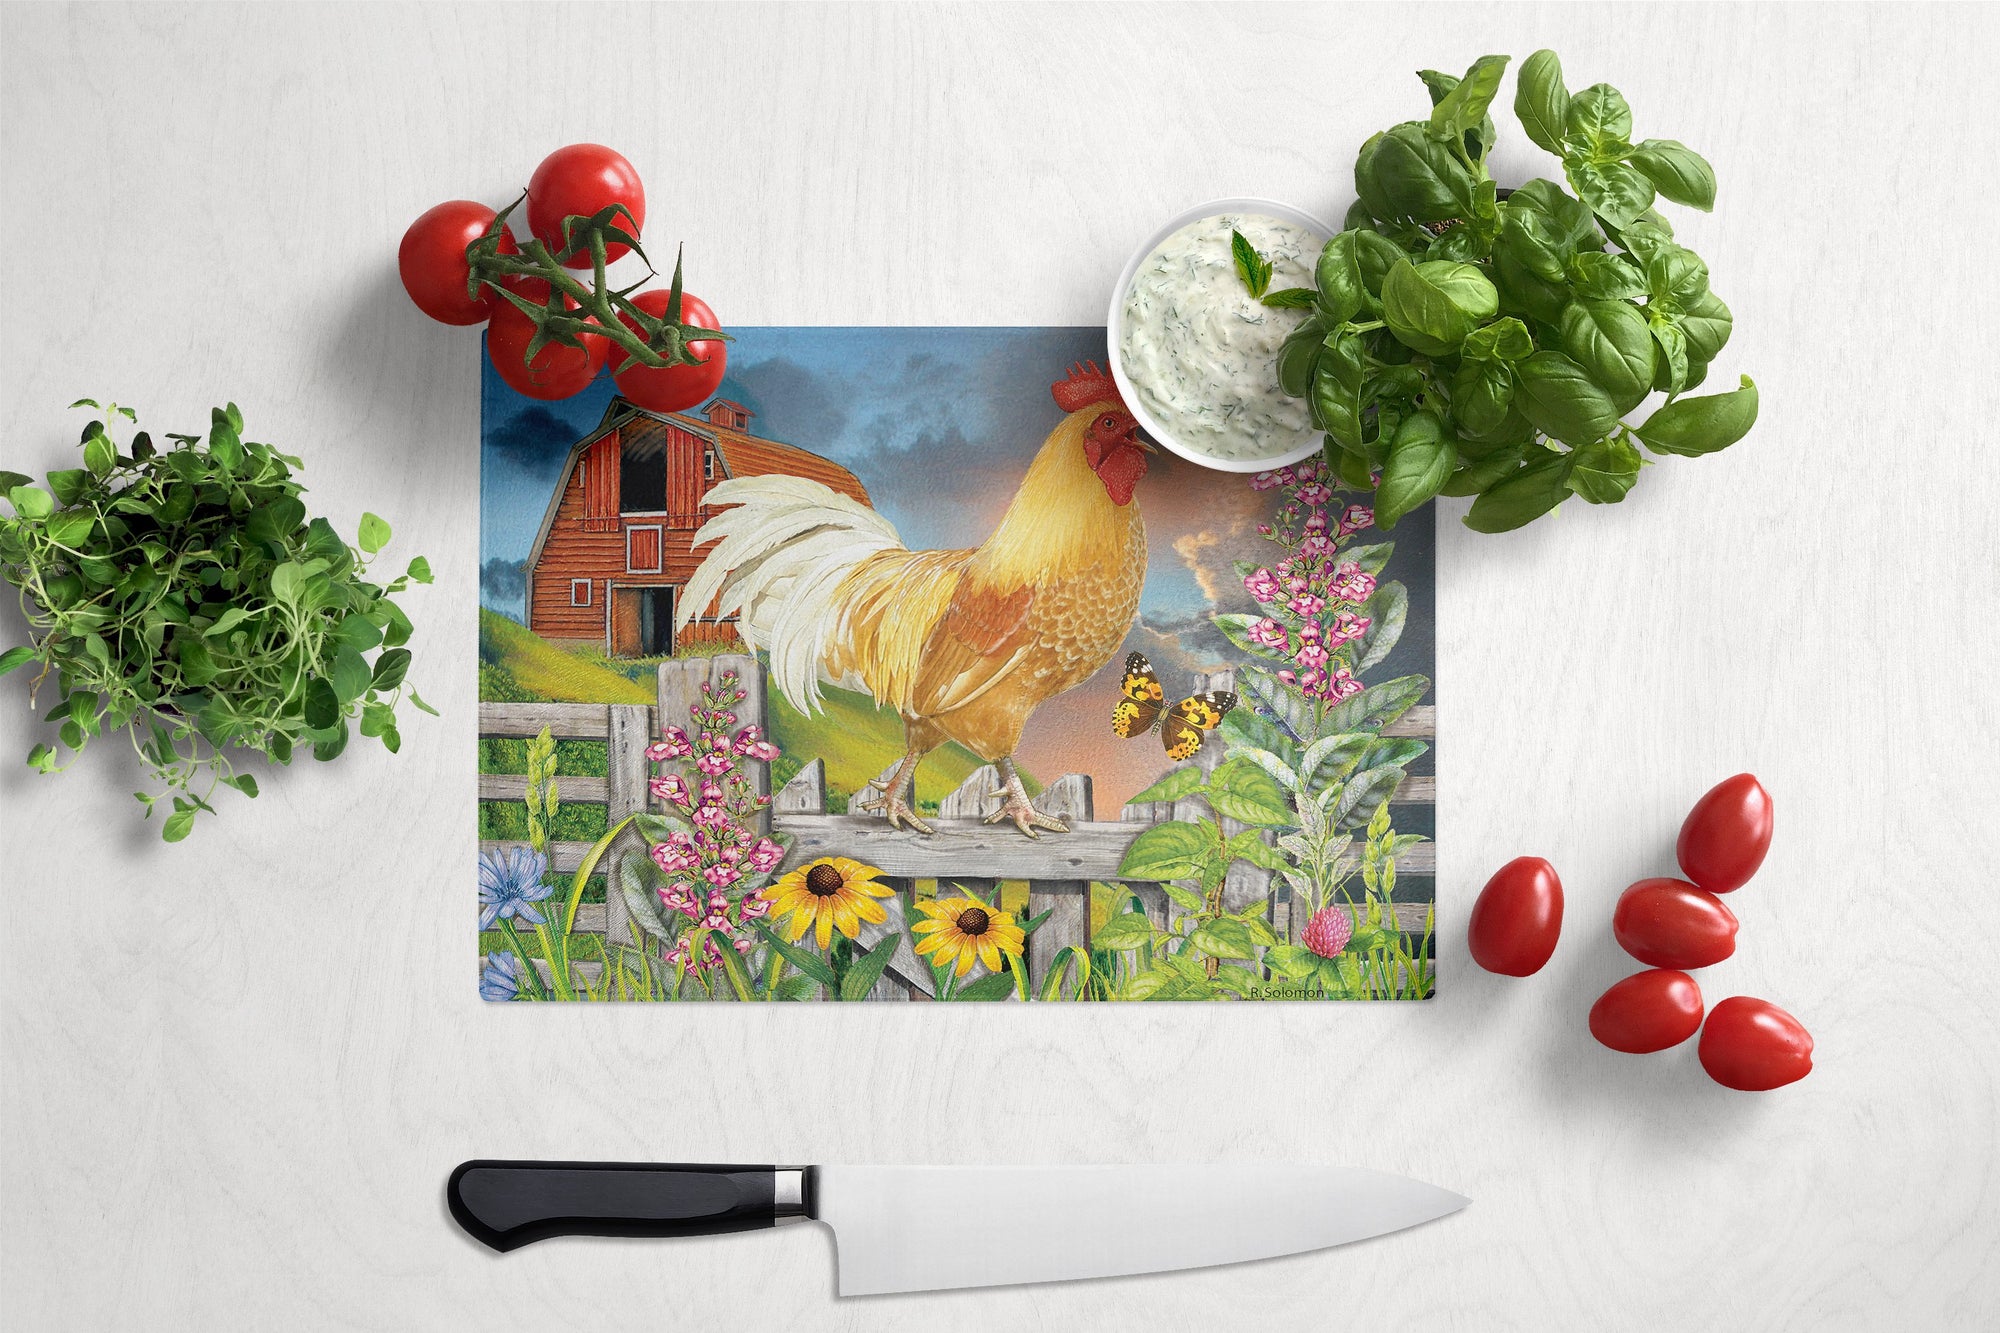 Yellow Rooster Greeting the Day Glass Cutting Board Large PRS4024LCB by Caroline's Treasures